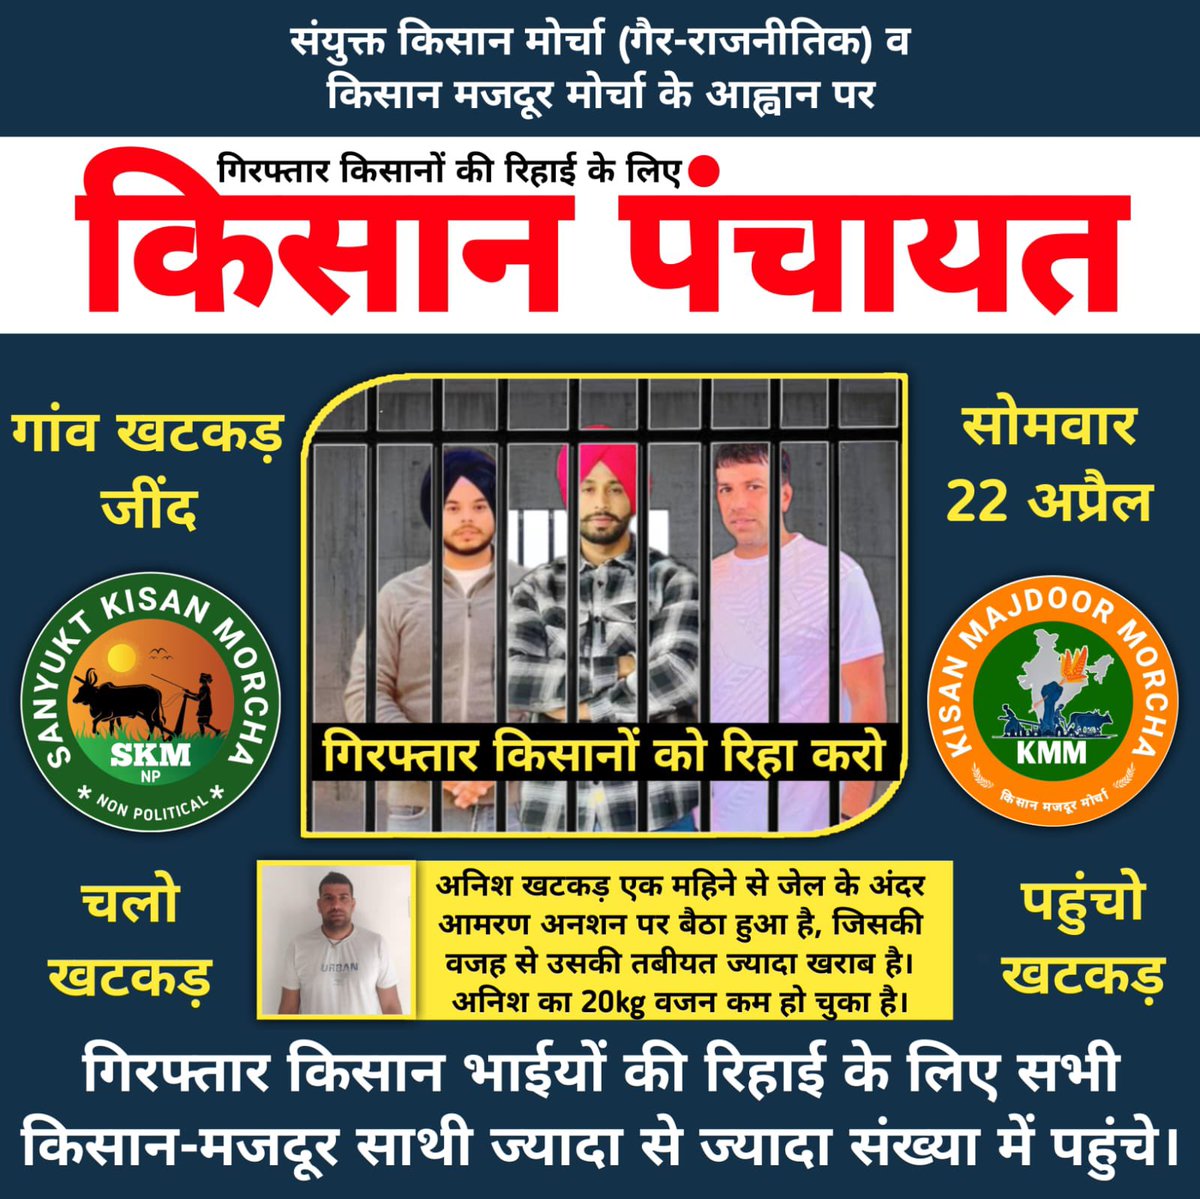 Farmers' Panchayat at village Khatkar (Jind) for the release of arrested farmers.

22 April, Chalo Khatkar (Jind)

Reach Khatkar (Jind)

#FarmersProtest2024
#FarmersProtest
#ReleaseArrestedFarmers